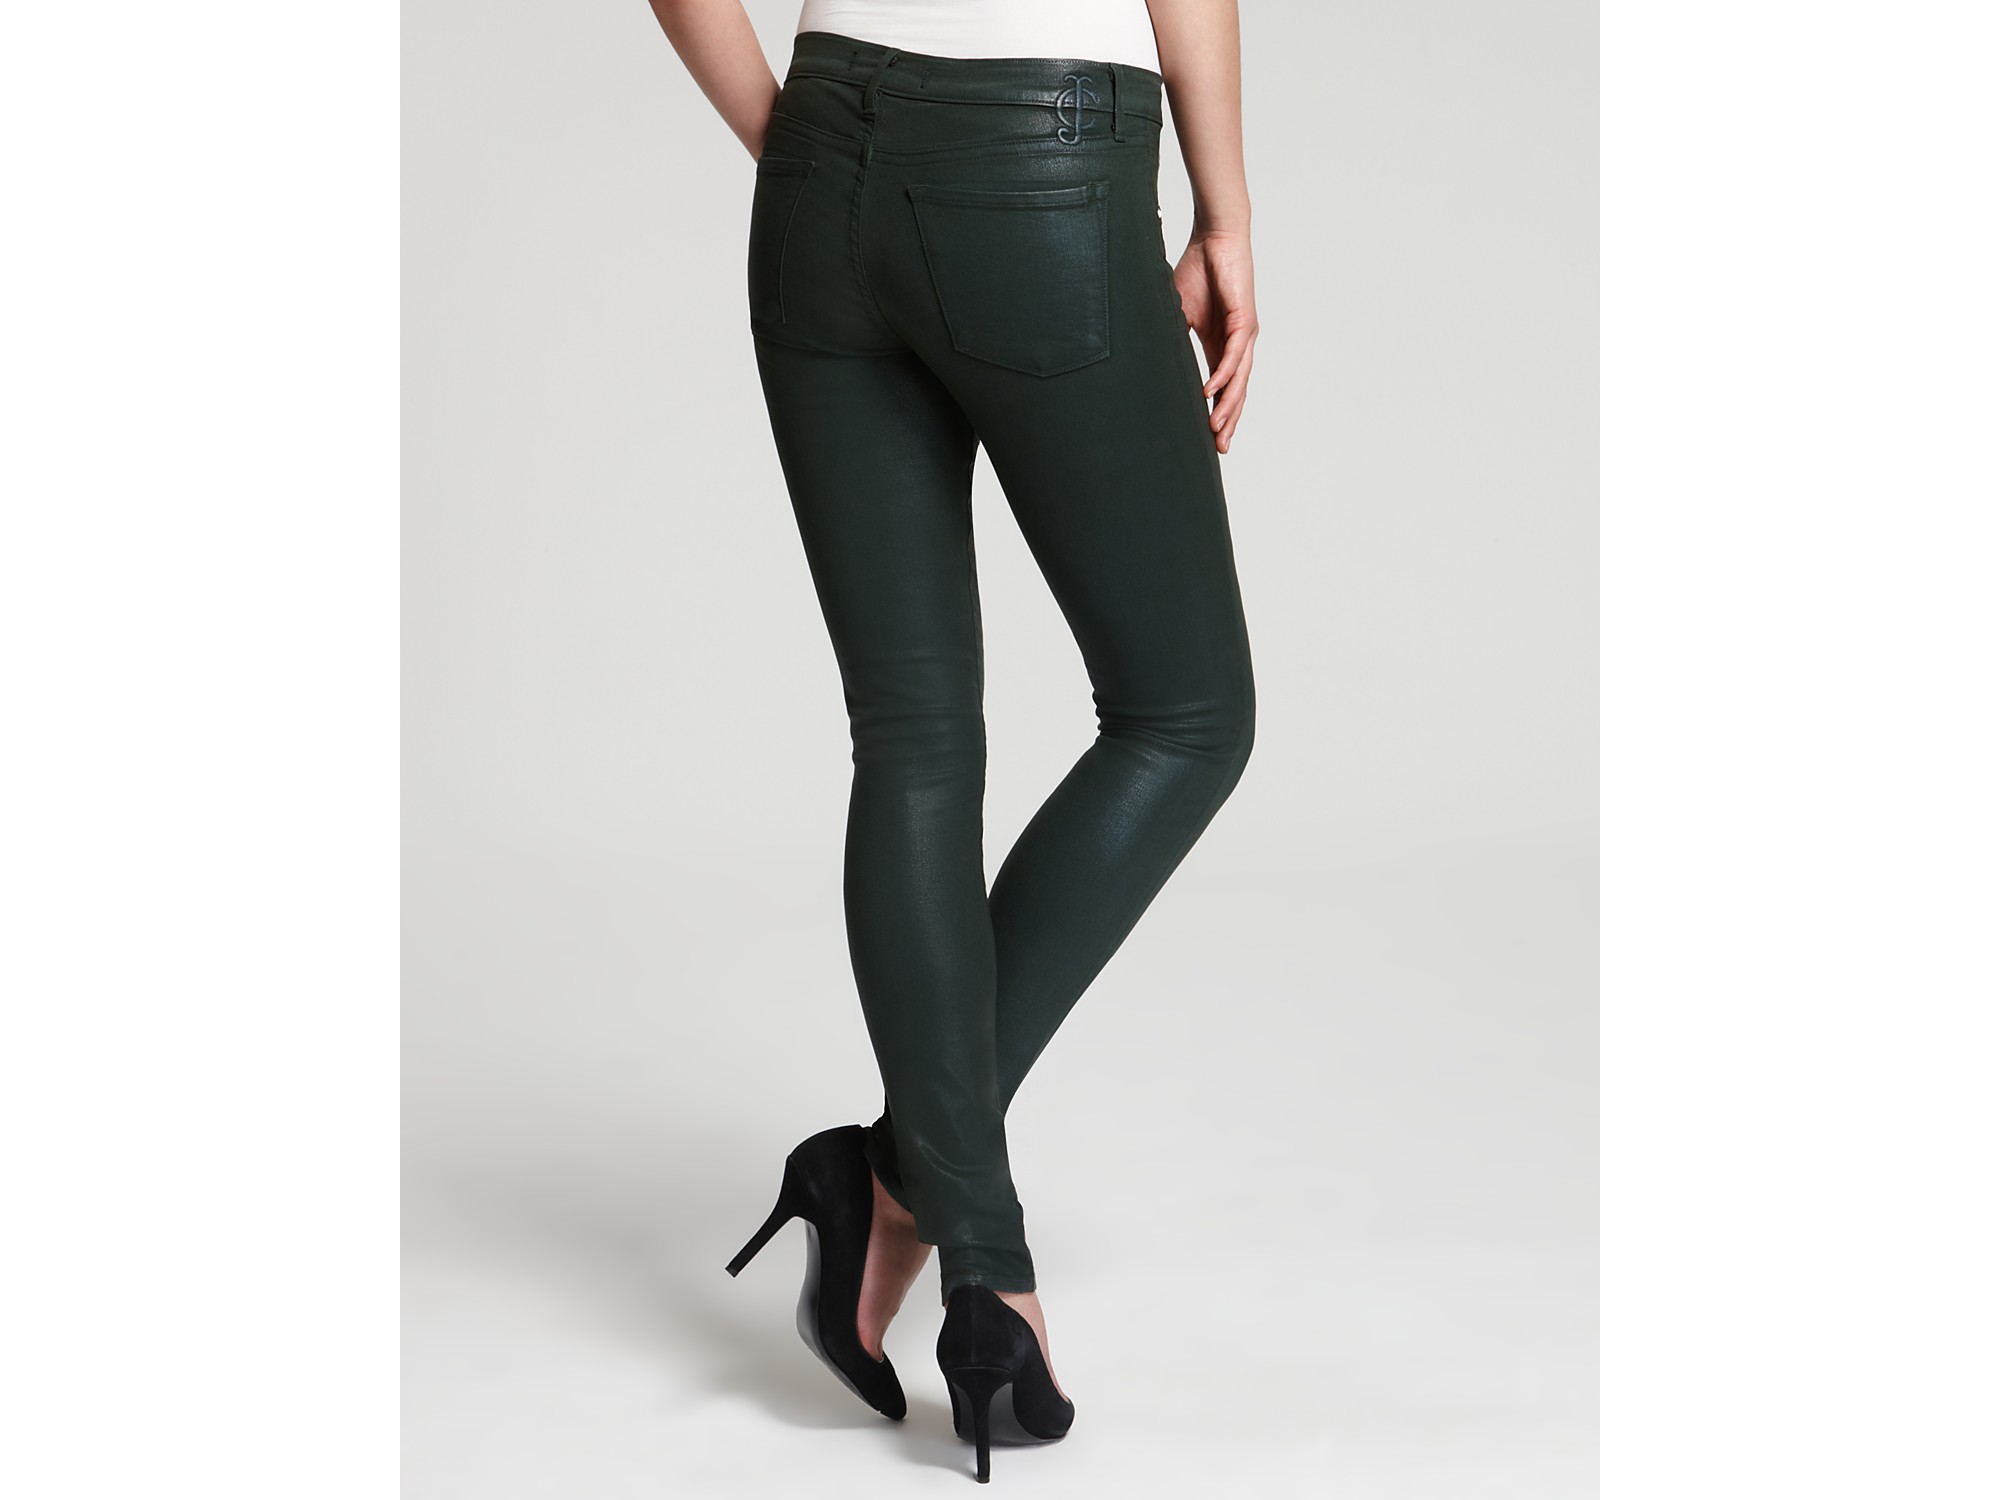 Lyst - Juicy Couture Coated Skinny Jeans in Black